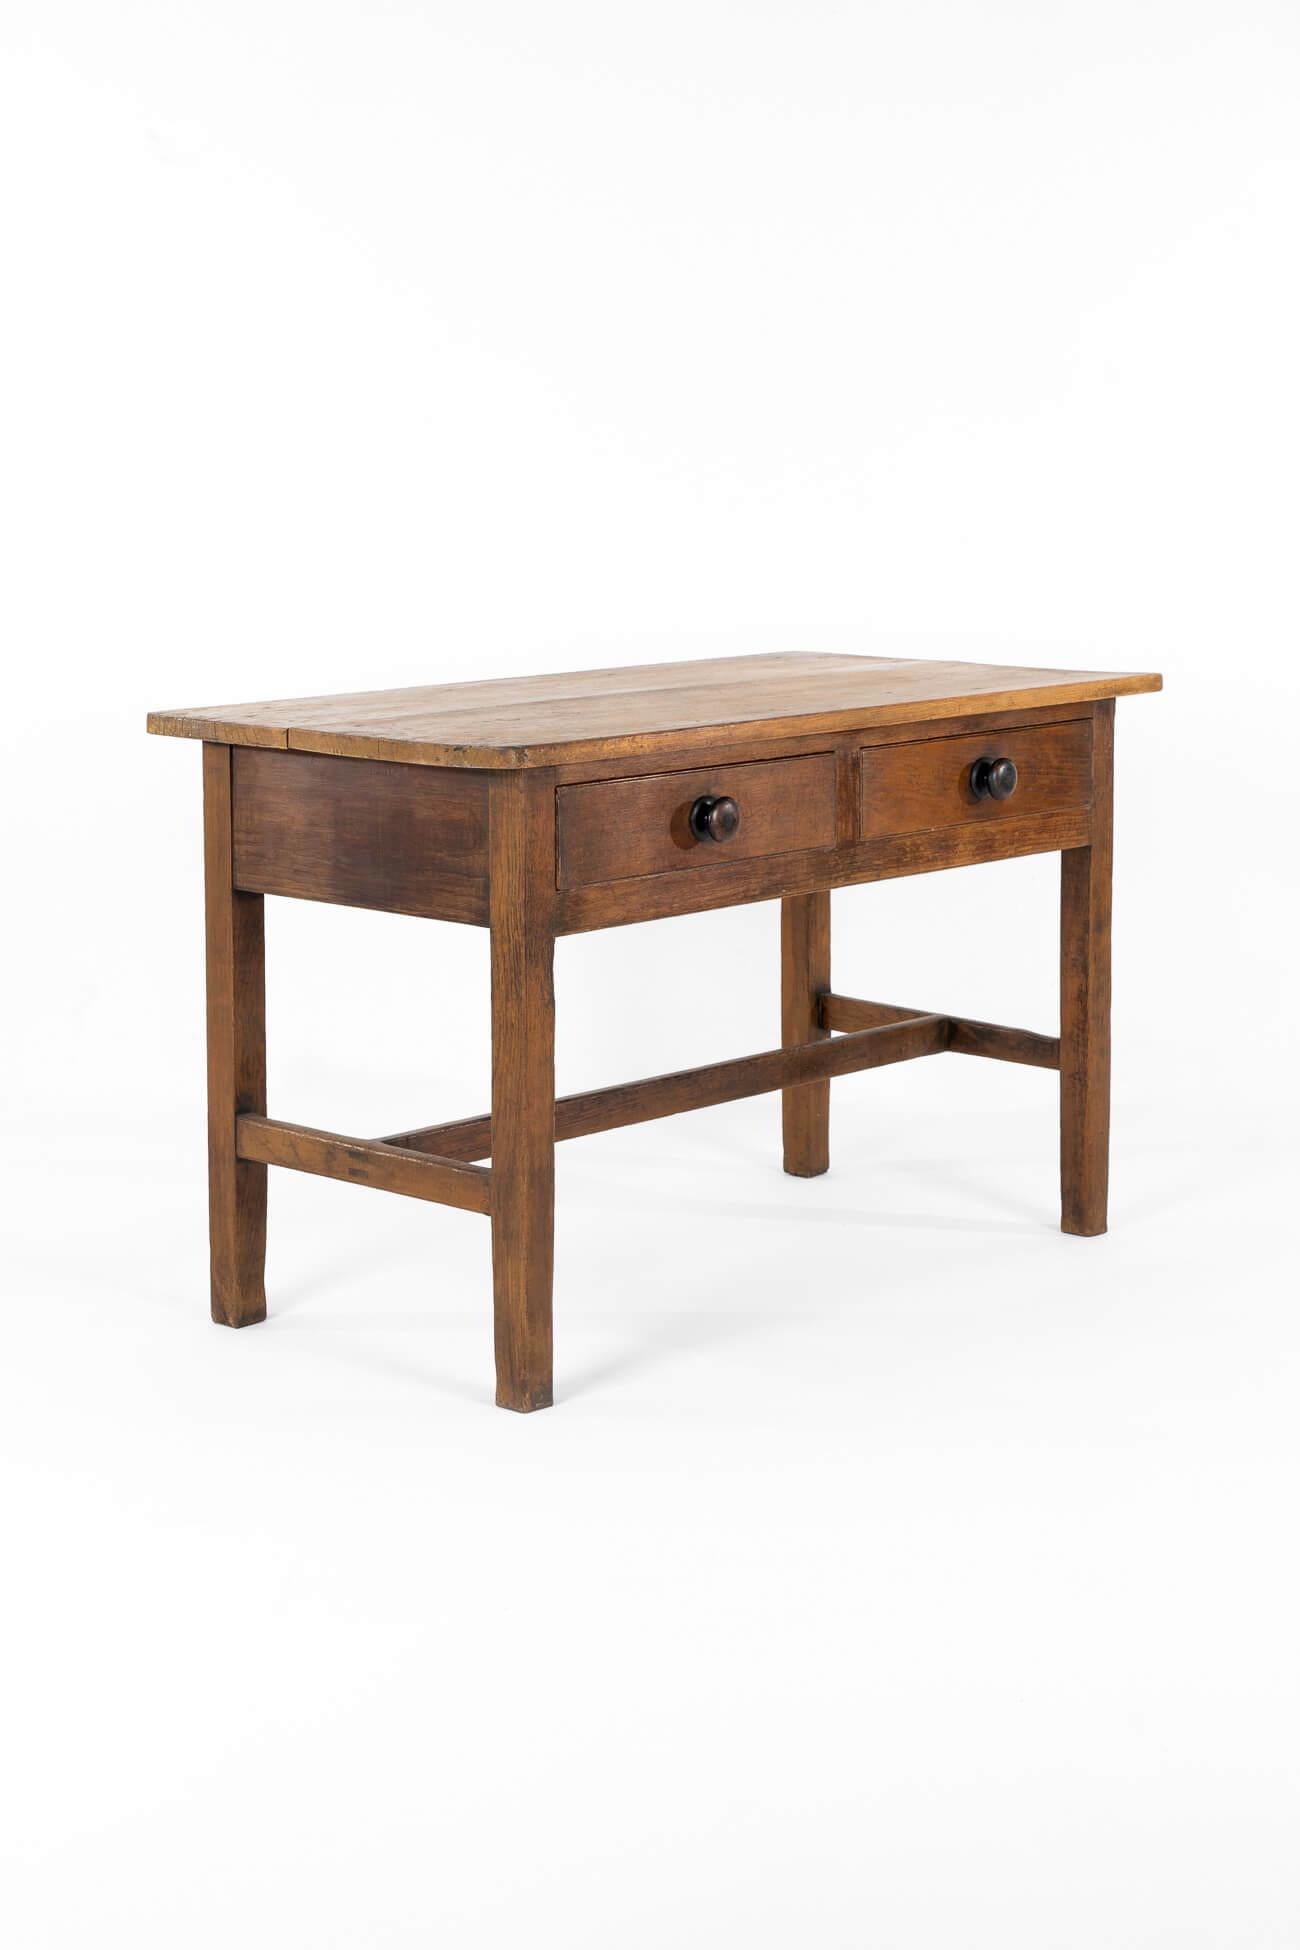 A generously proportioned Welsh dairy table in pine, with a wonderful two-plank top.

Two smooth-running central drawers with ebonised handles.

Raised on box legs and united by an H-stretcher.

Wales, circa 1880.

L: 122 CM  L: 48.1 INCHES

W: 66